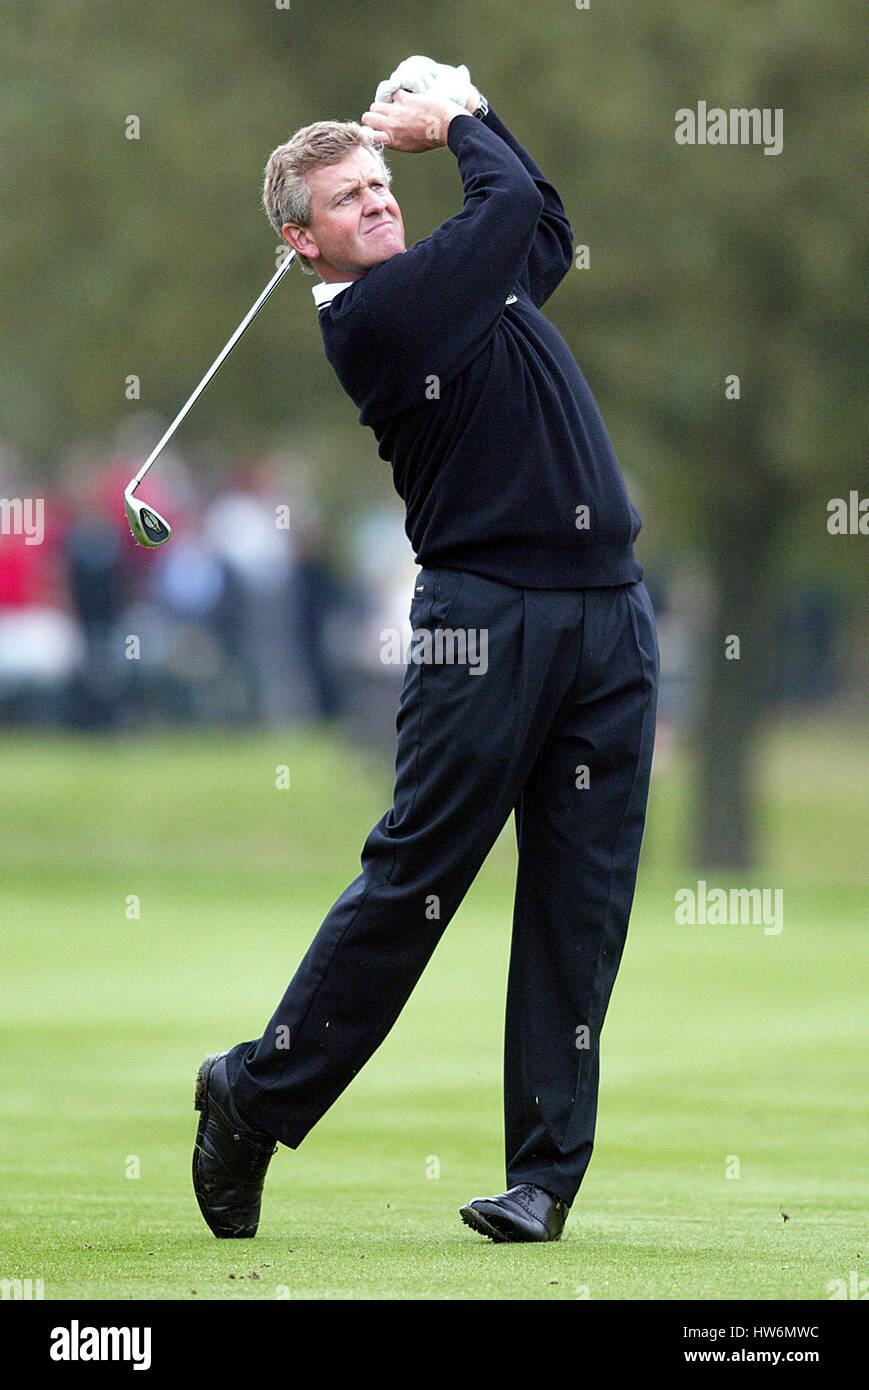 COLIN MONTGOMERIE RYDER CUP 02 8TH HOLE THE BELFRY SUTTON COLDFIELD BIRMINGHAM ENGLAND 28 September 2002 Stock Photo